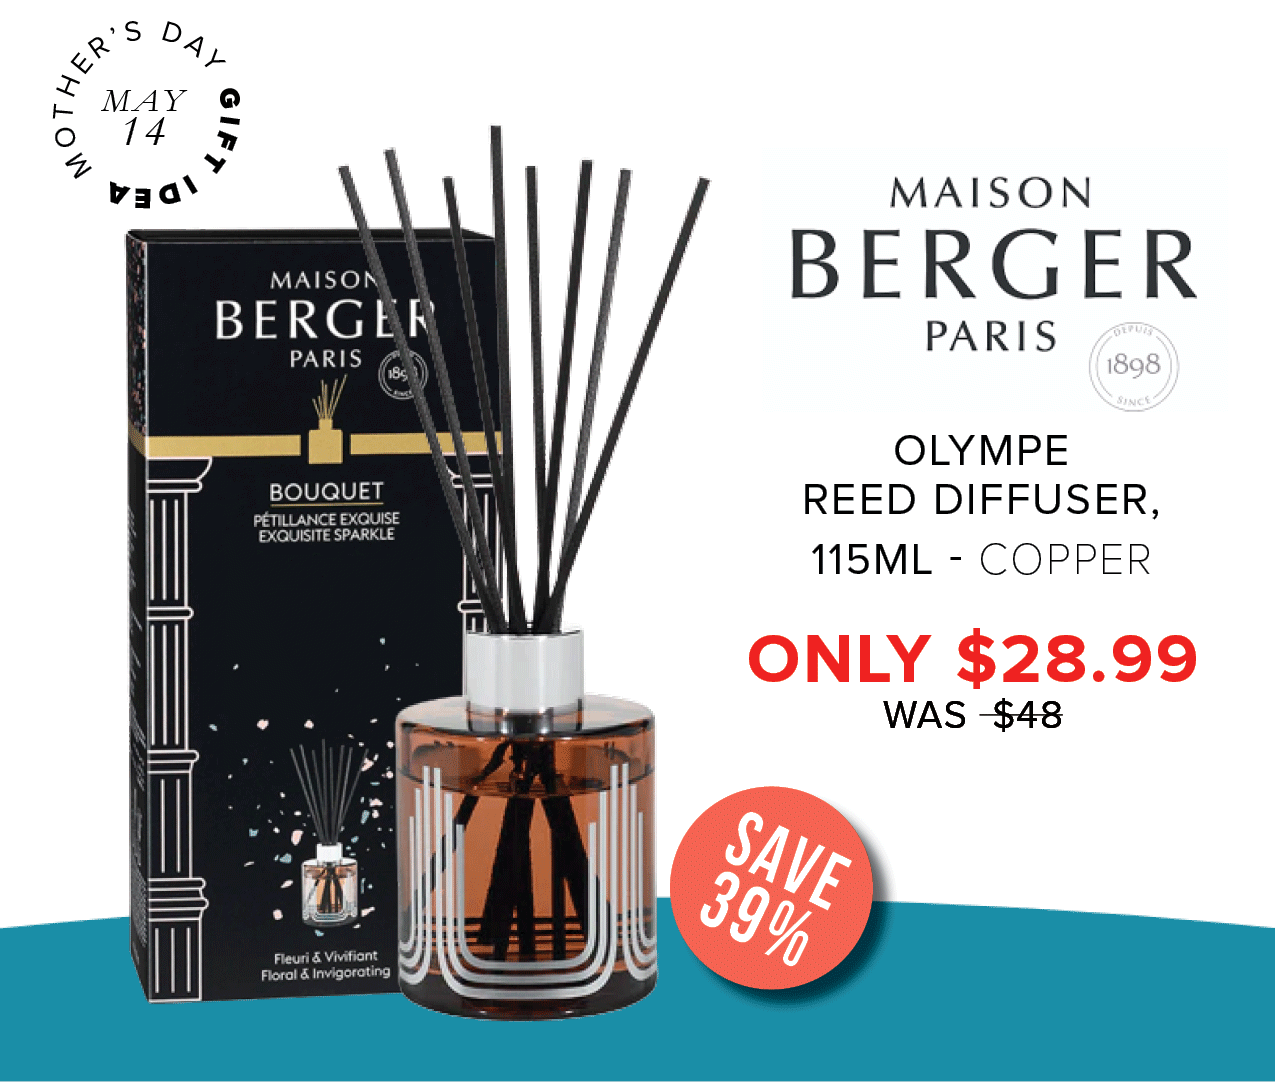 MAISON BERGER e PARIS L OLYMPE REED DIFFUSER, 15ML - COPPER ONLY $28.99 WAS -$48 